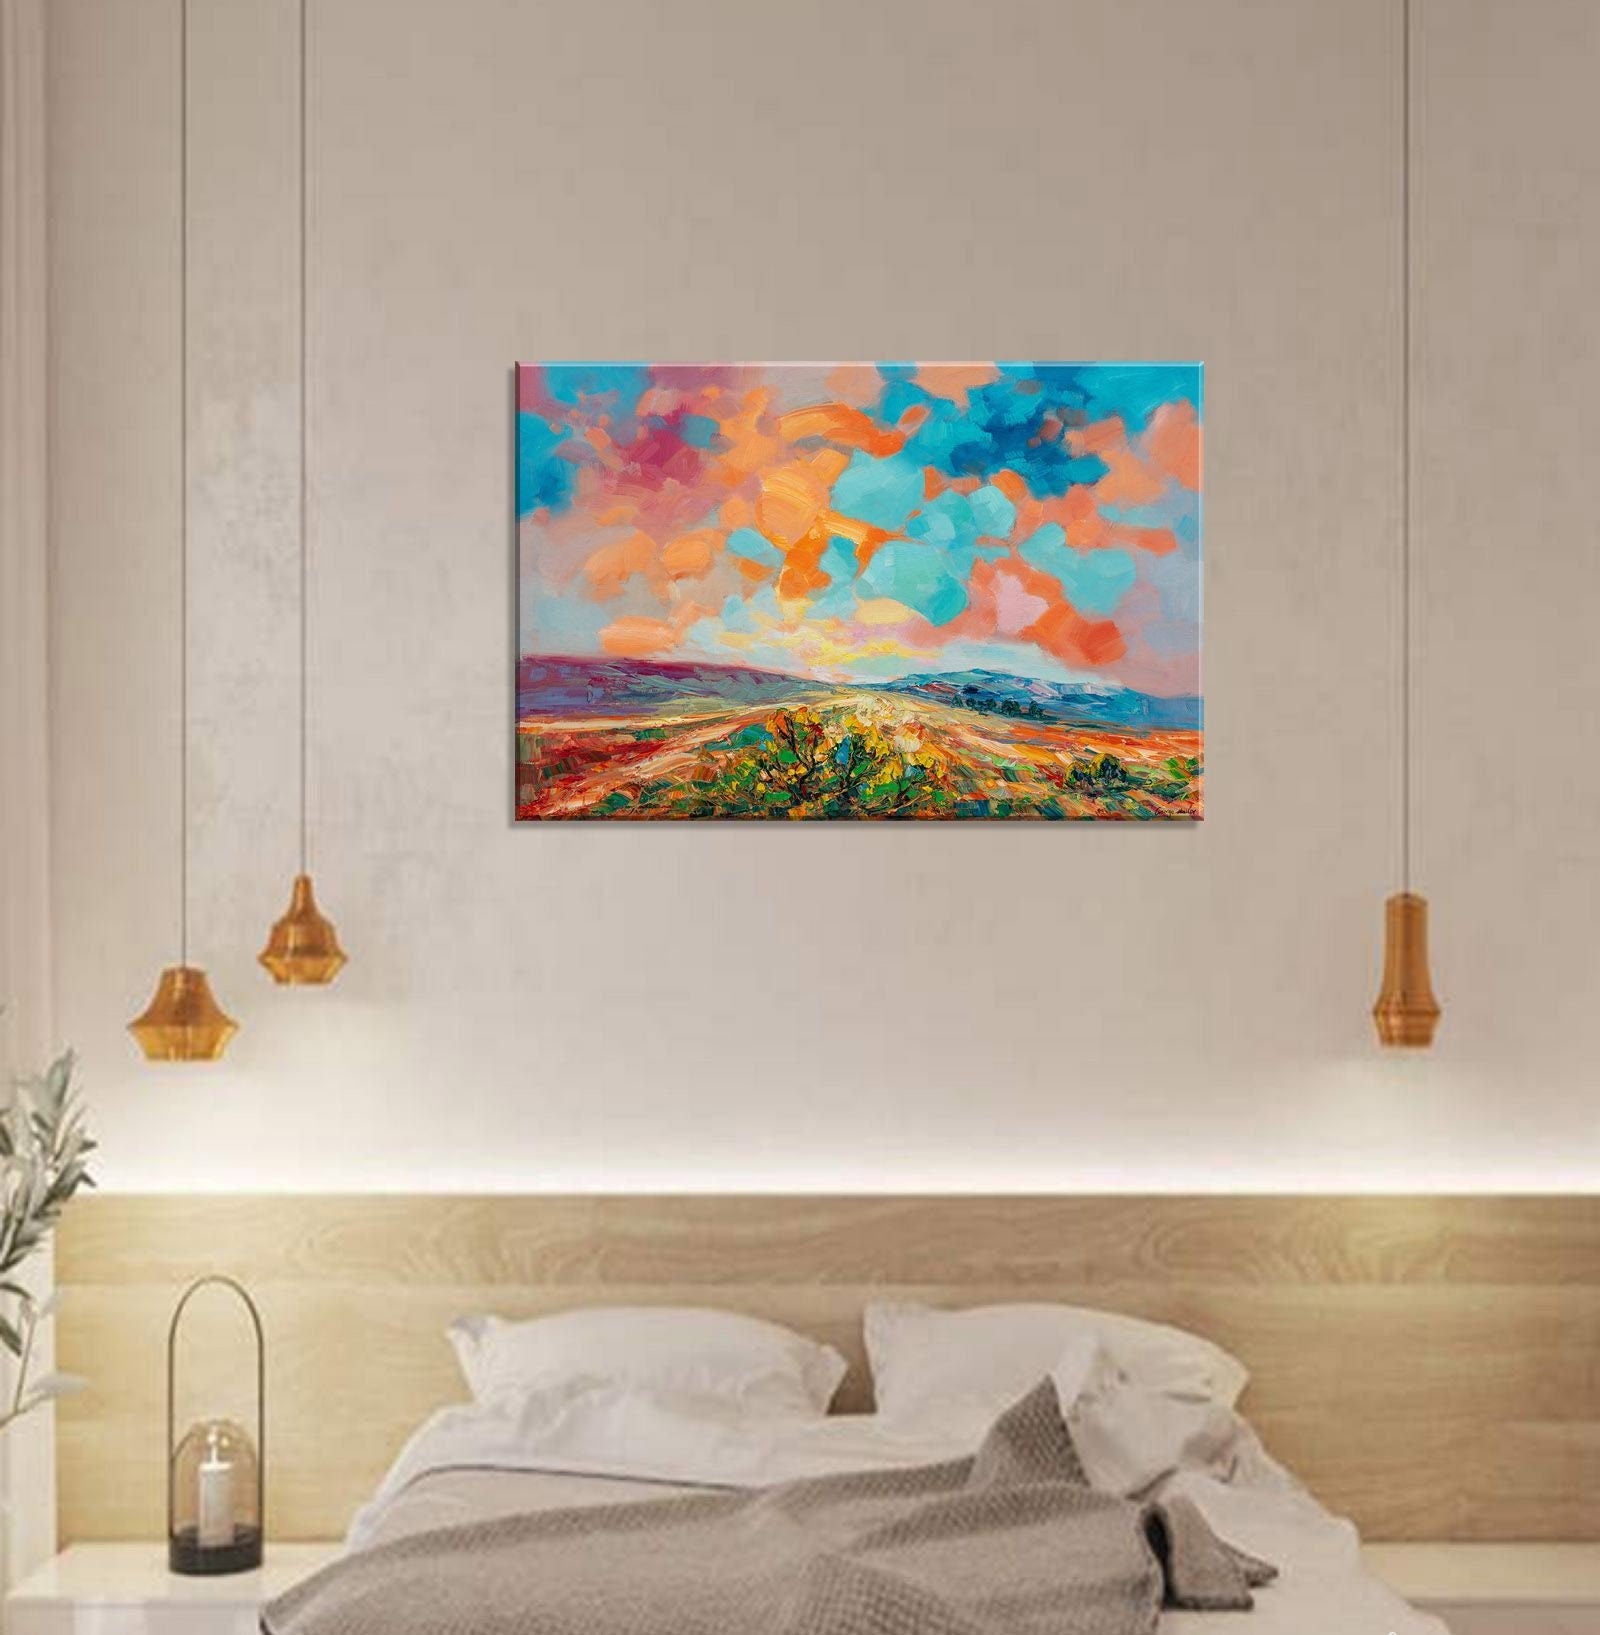 Stunning Handmade Palette Knife Abstract Landscape Oil Painting, Ready to Hang, 32x48 inches - a Modern, Large Wall Art Masterpiece